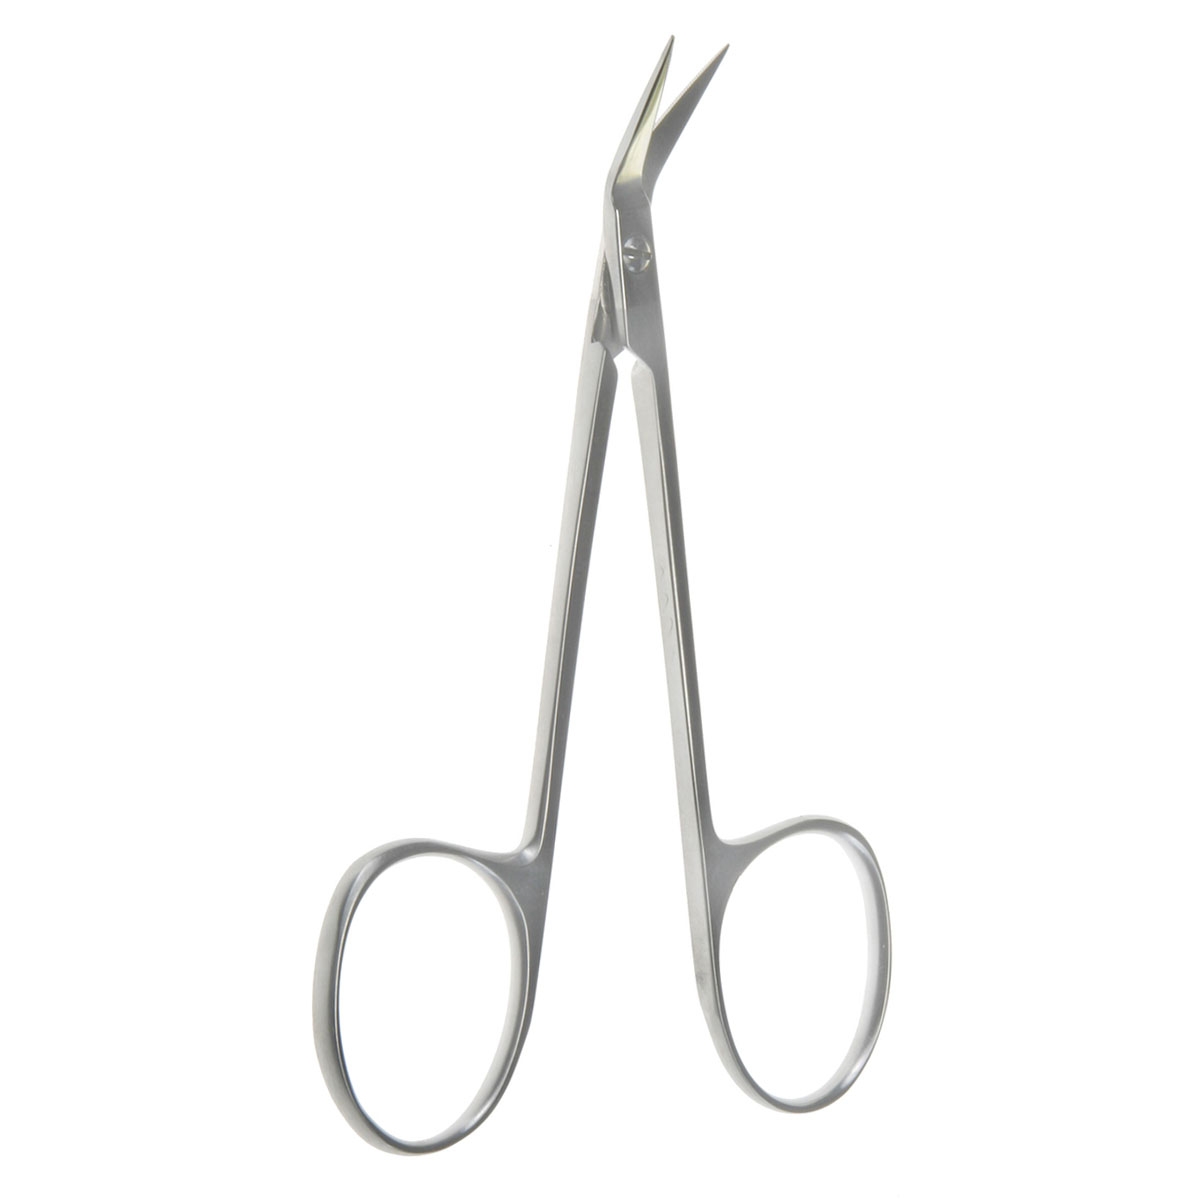 3 3/4 Wilmer Conjunct Utility Scissors - ang - BOSS Surgical